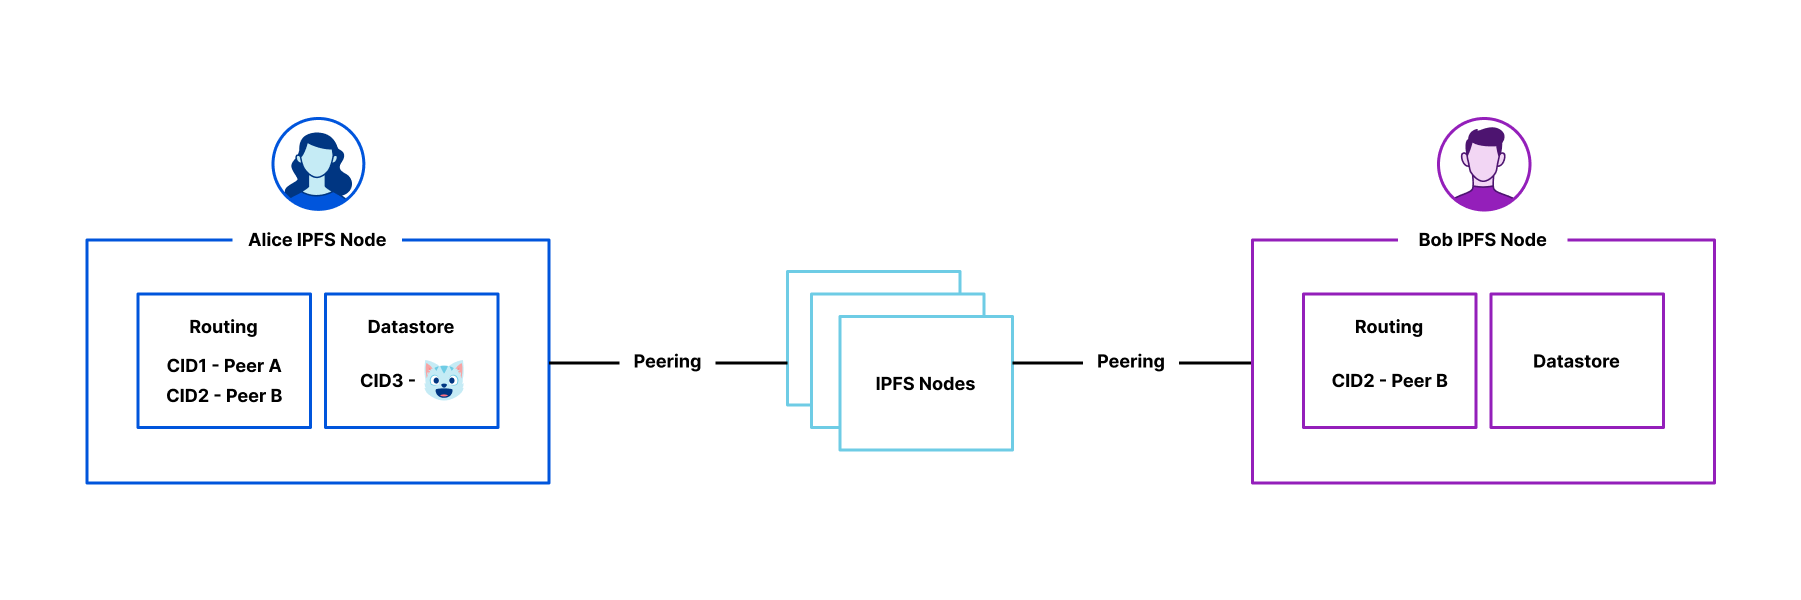 Alice and Bob are part of the IPFS network, peering via multiple hops on the IPFS network. They don’t have each other in their peering table.